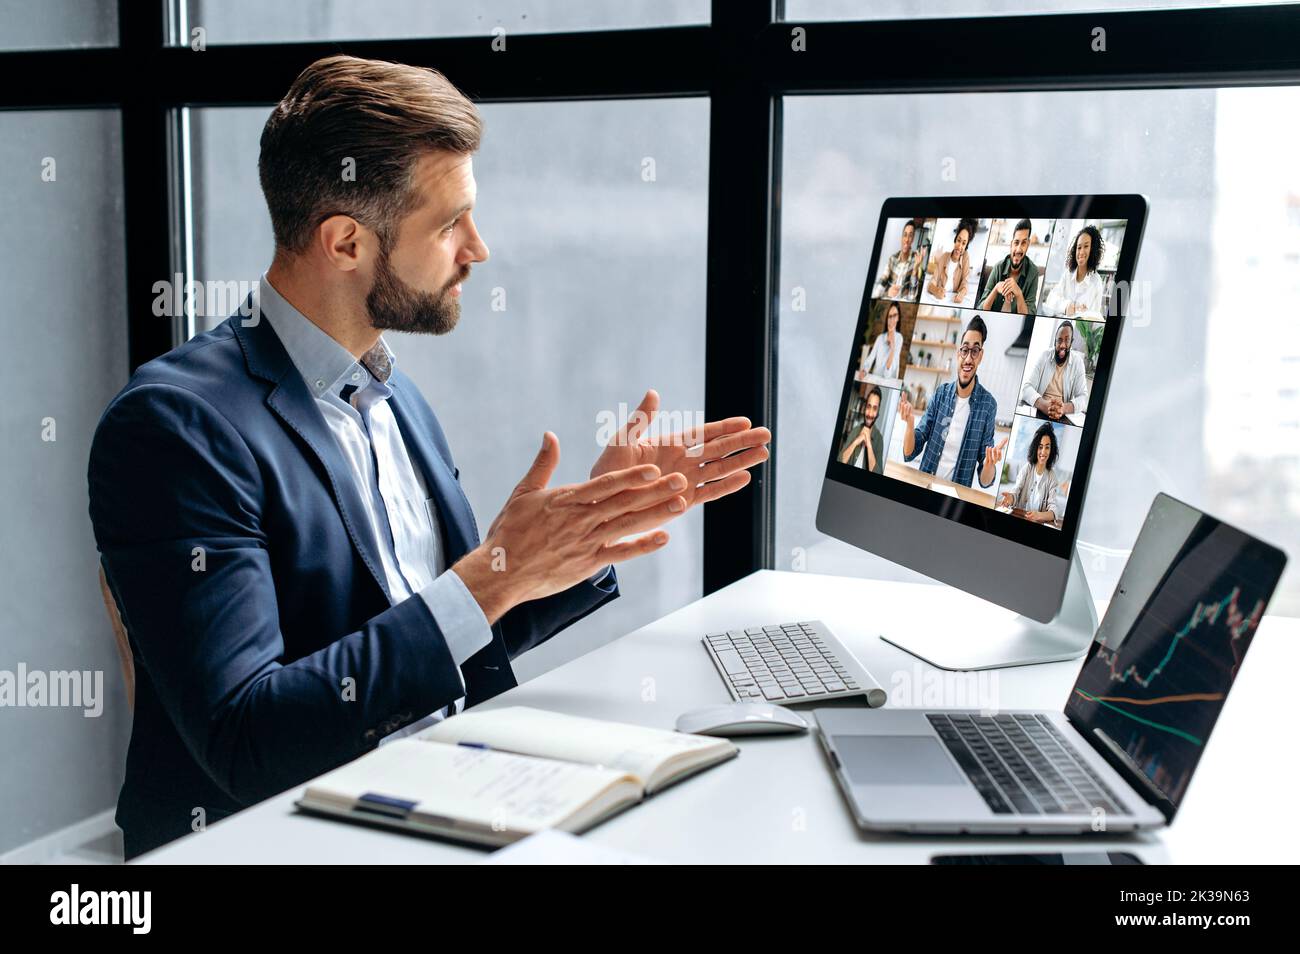 Side view at a successful man, company boss, stock investor, having financial brainstorm with group of multiracial people by video conference, discuss investments in the stock market, risks Stock Photo